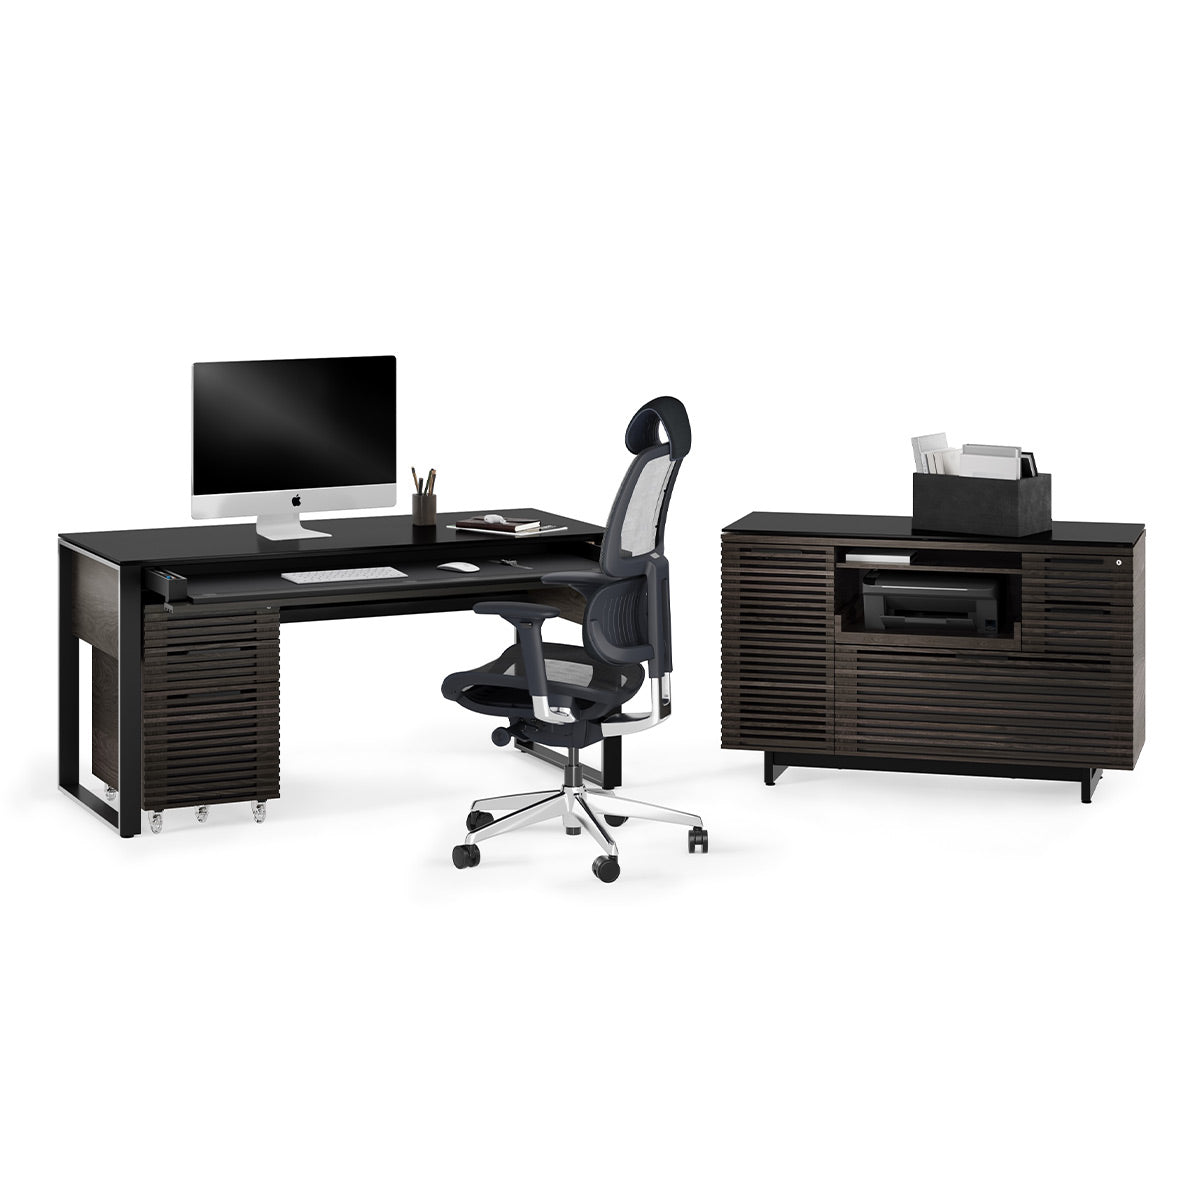 BDI Corridor 6501 Desk with Keyboard Drawer (Charcoal Stained Ash)